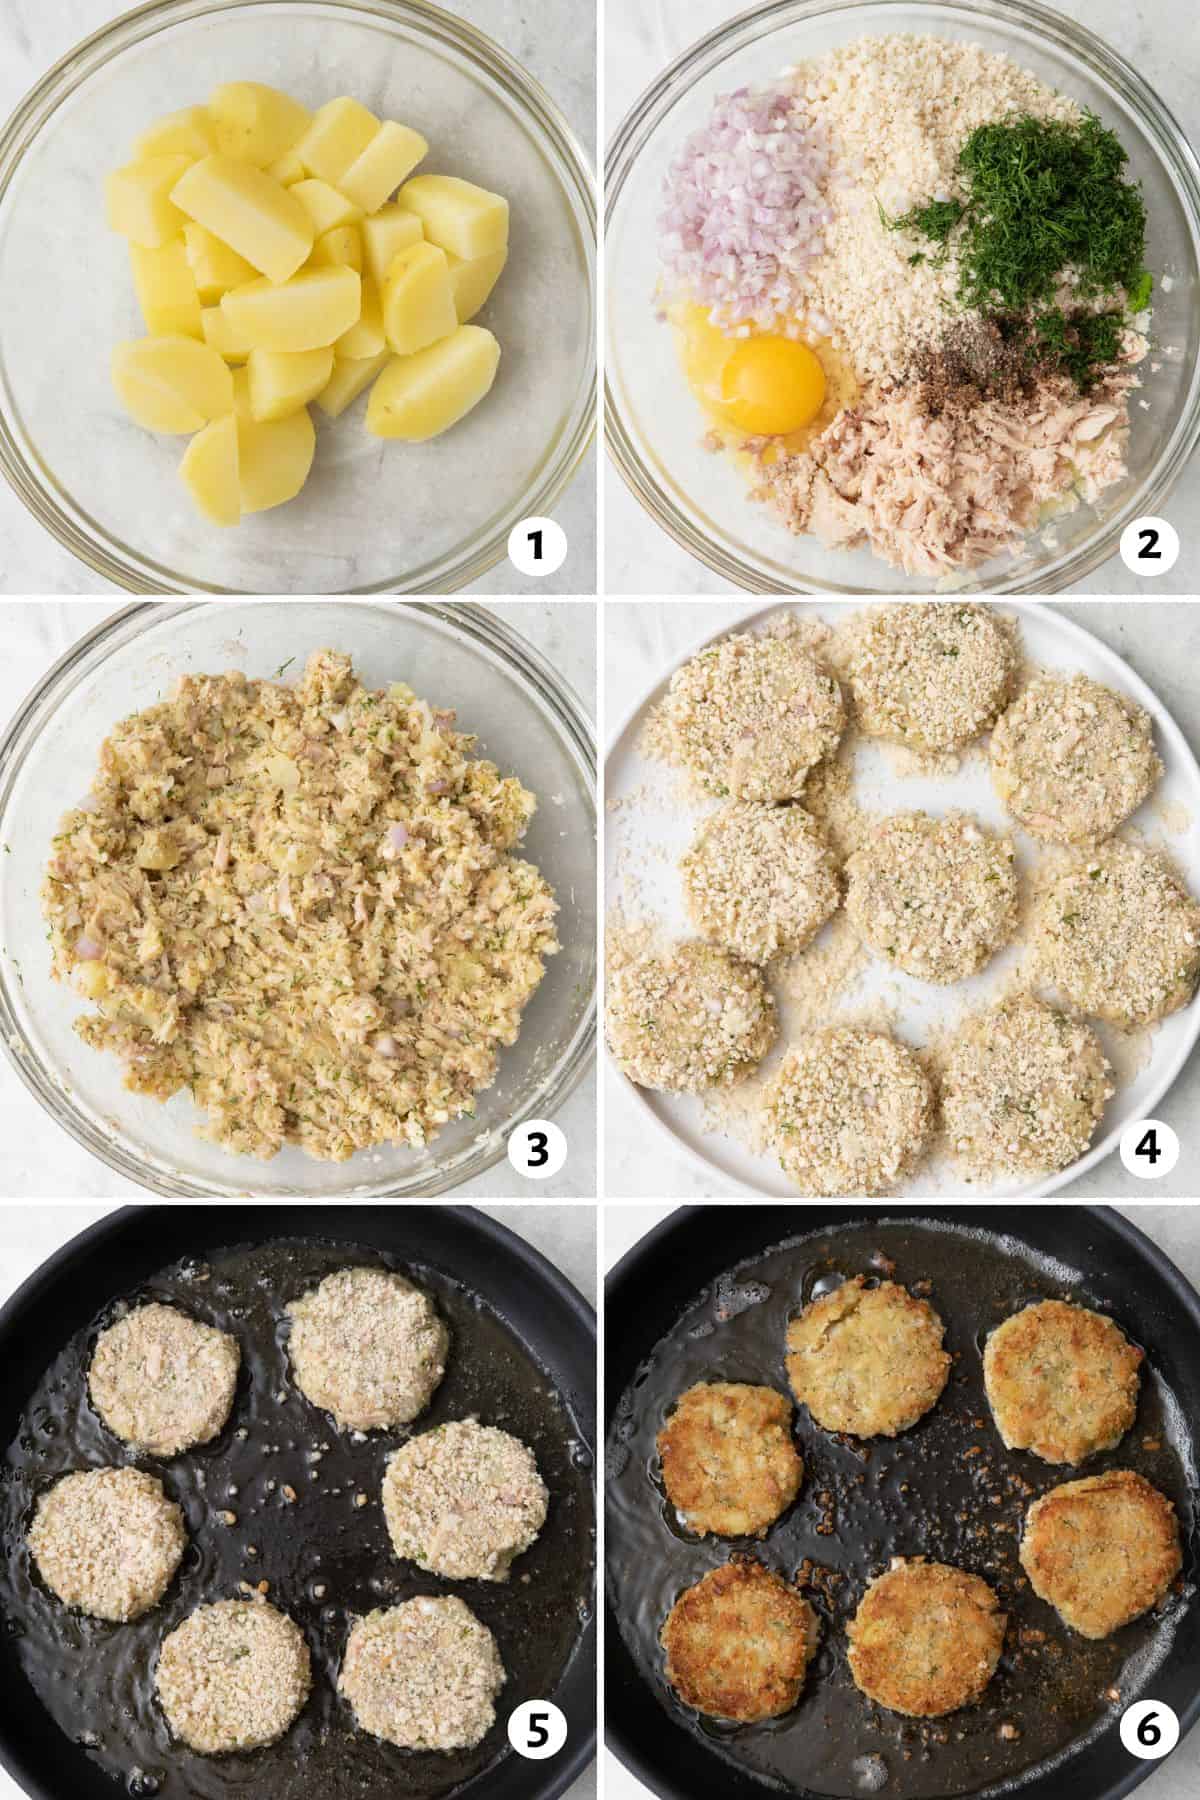 6 image collage making recipe: 1- cooked potatoes in a bowl, 2- after mashing with remaining ingredients added on top, 3- after combining mixture, 4- mixture shaped in to small patties and coated in breadcrumbs, 5- patties in a fry pan with oil, 6- after flipping to show crispy breading.